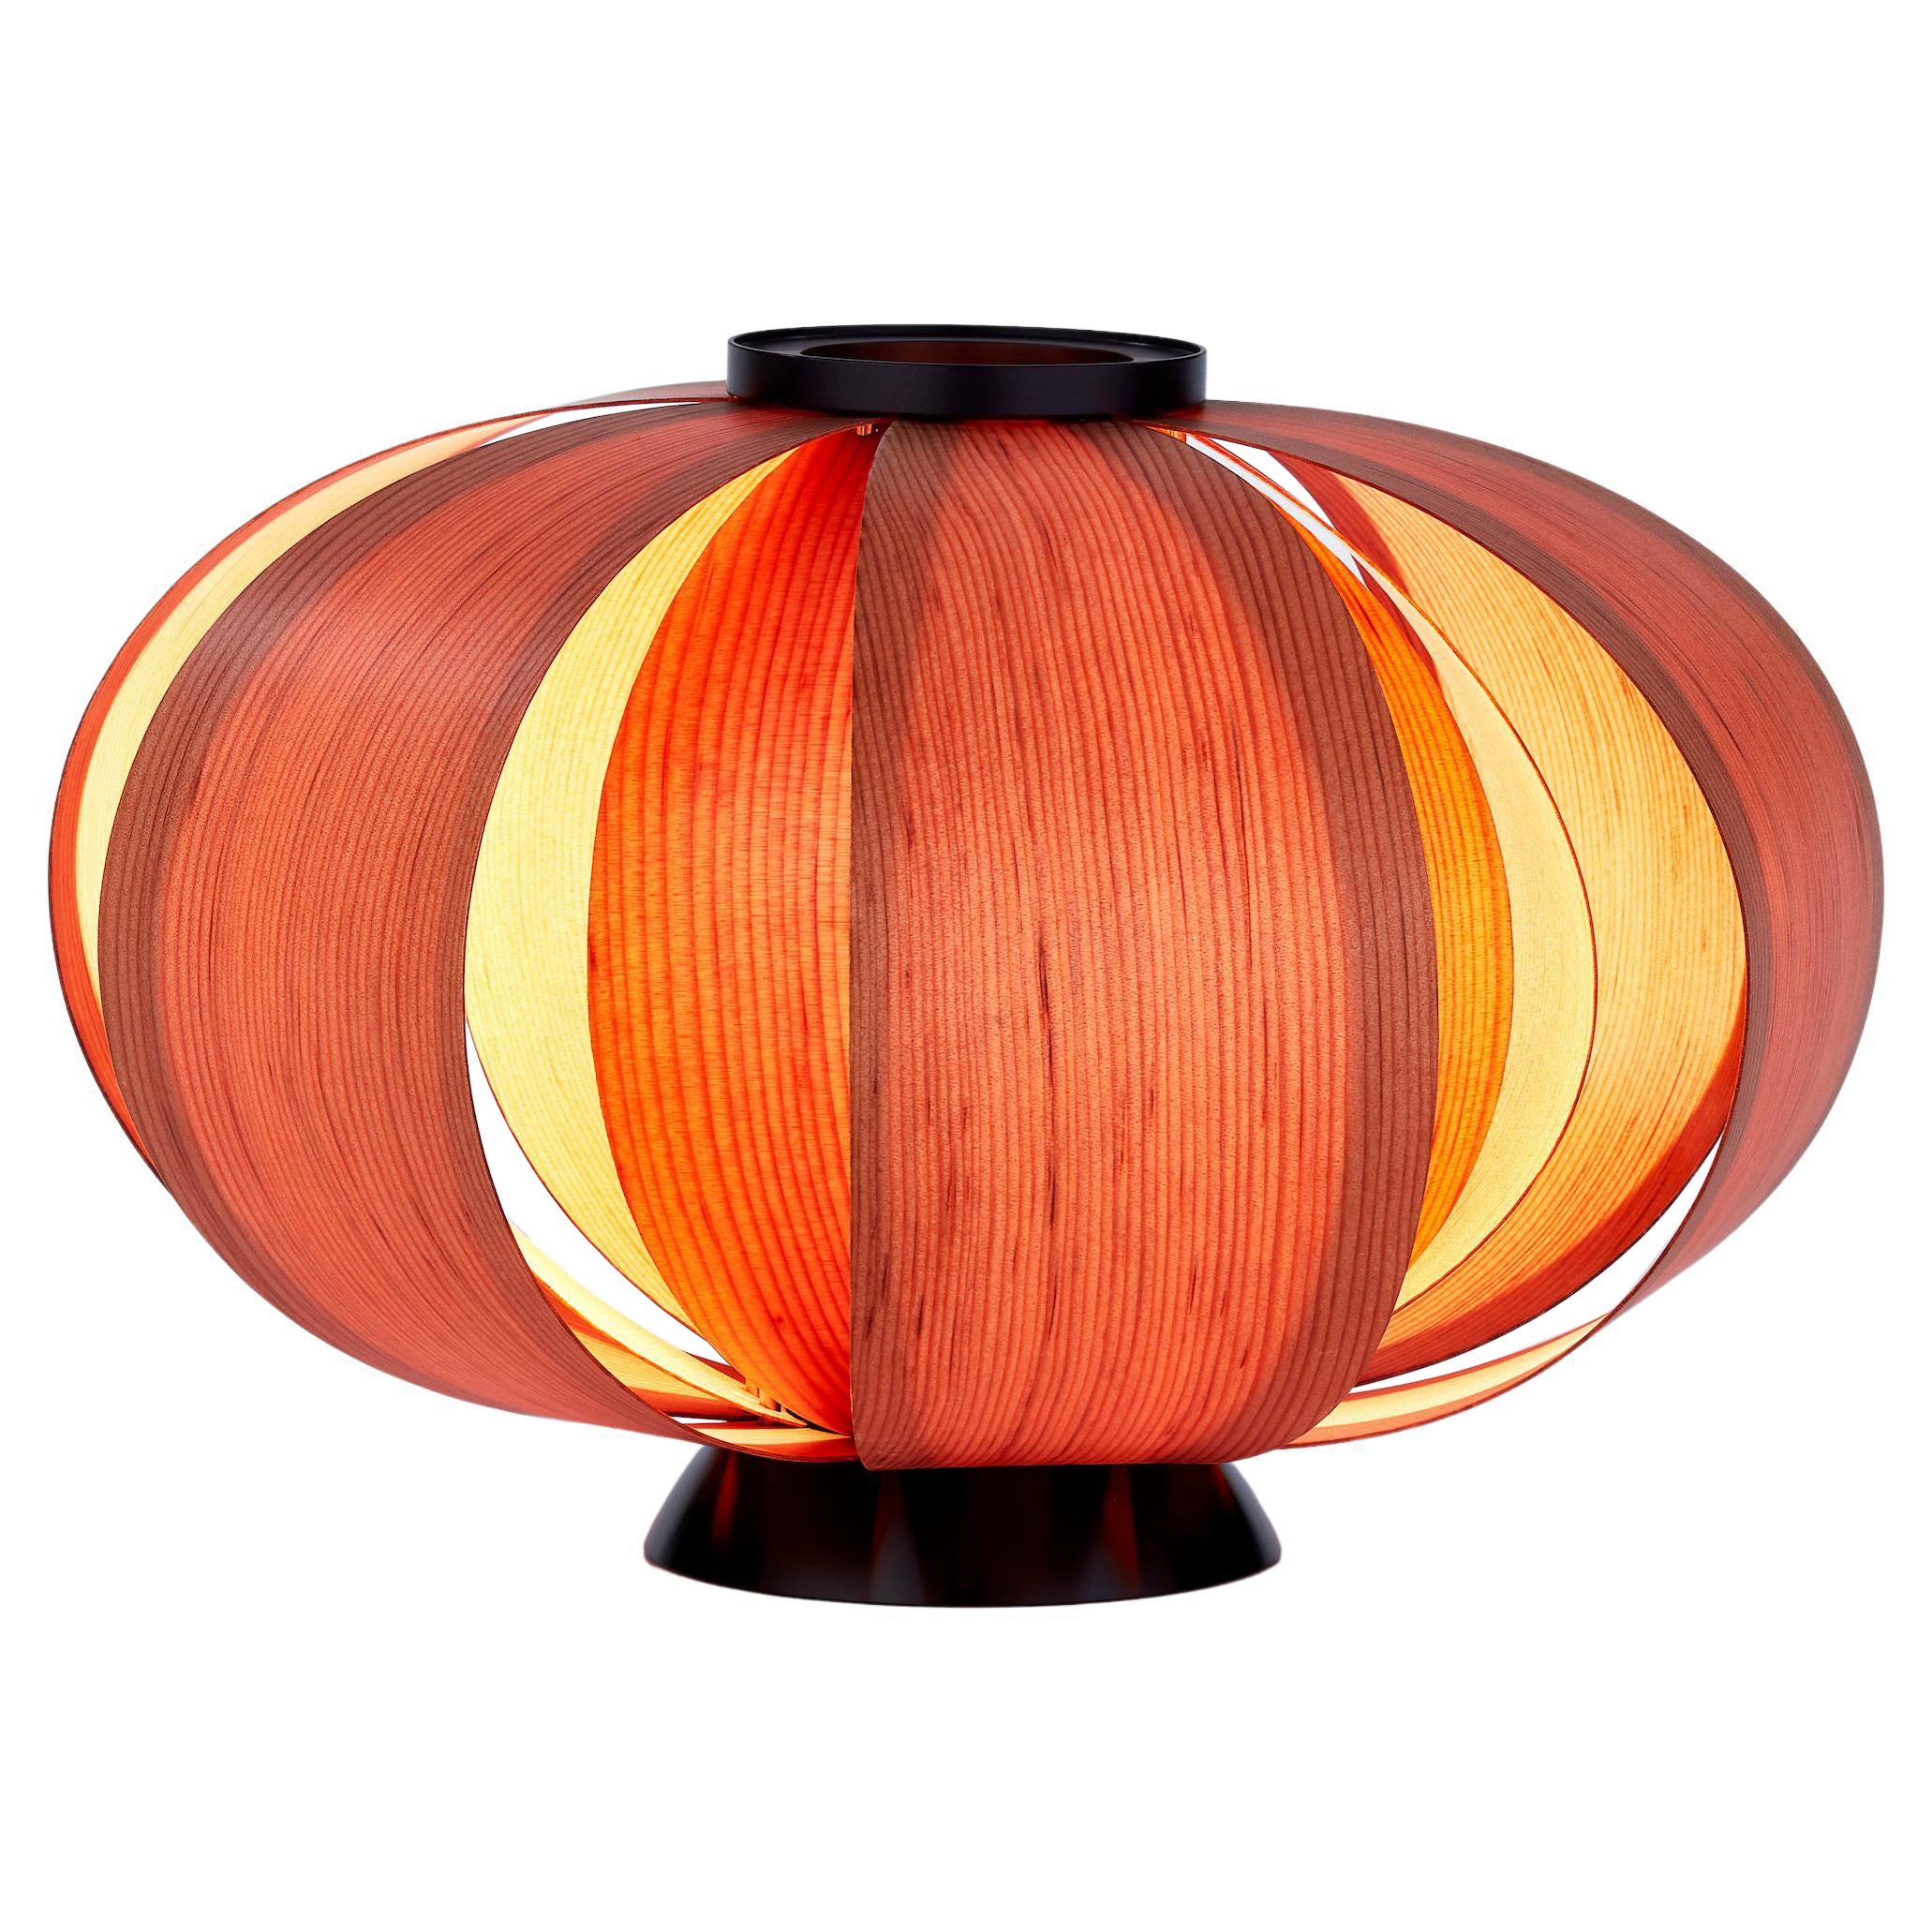 J.A. Coderch 'Disa Mini' Wood Table Lamp for Tunds For Sale